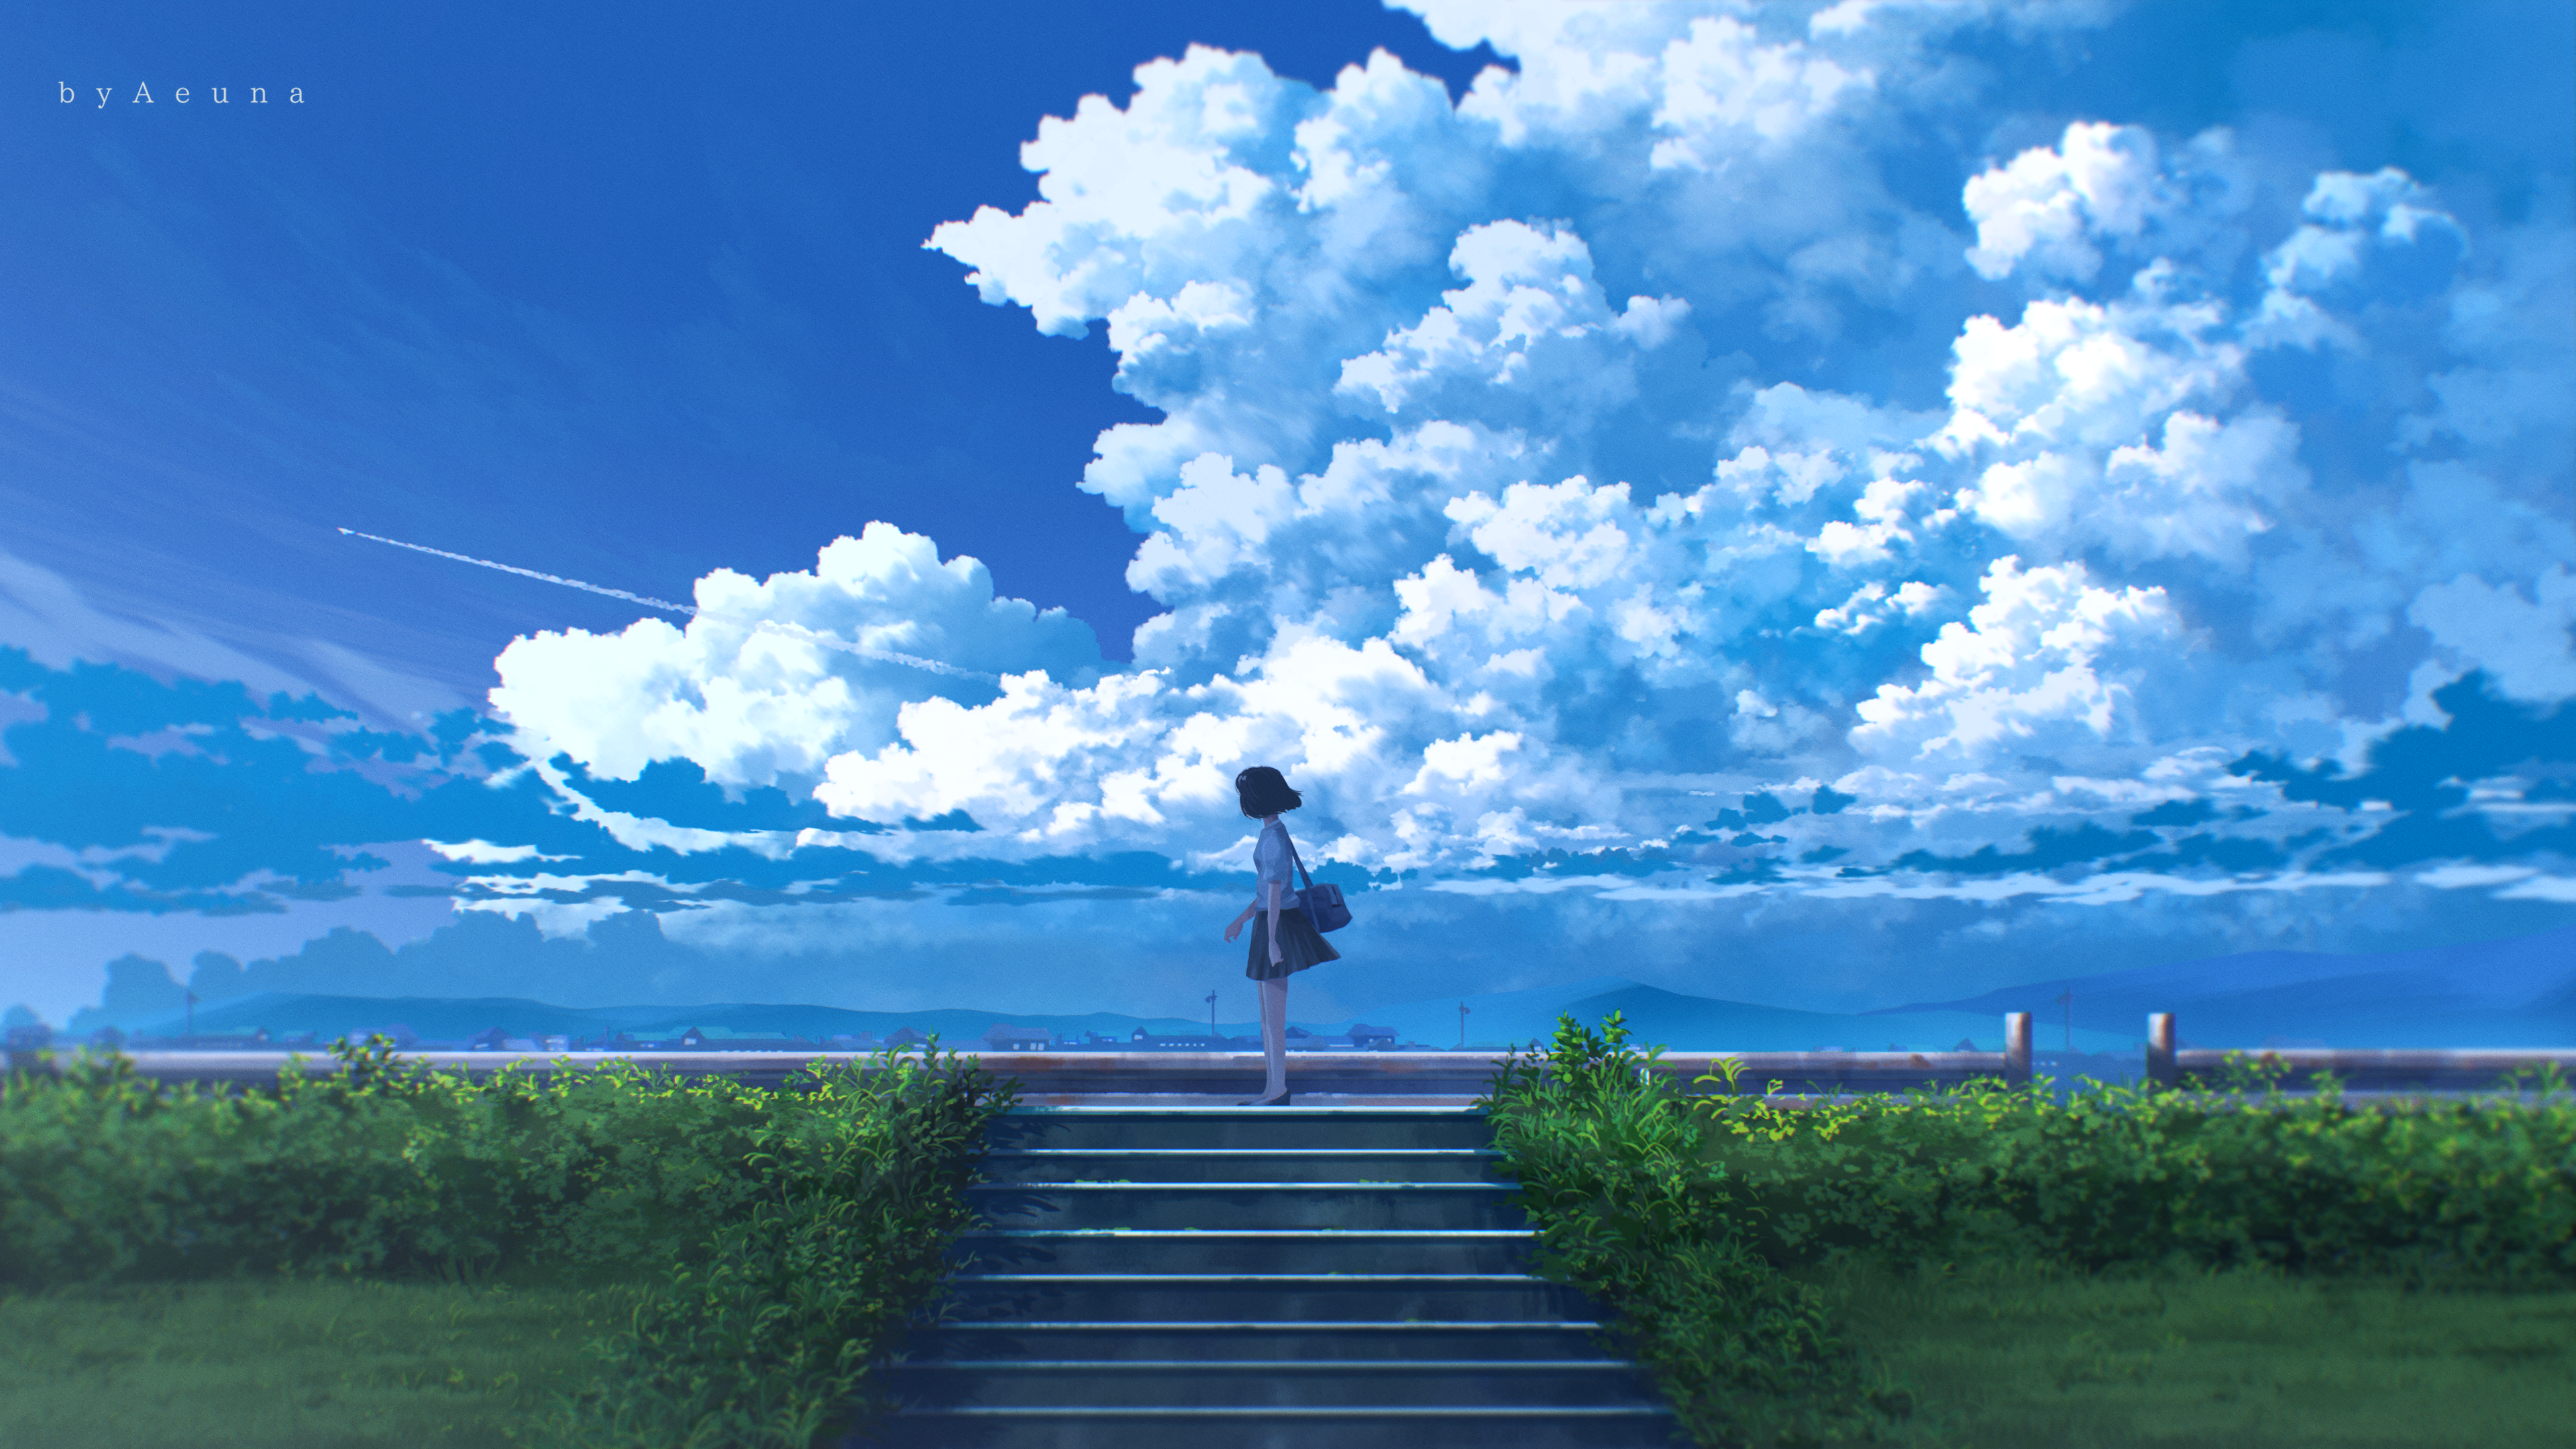 Anime 3840x2160 artwork digital art illustration anime anime girls sky clouds airplane grass stairs skirt short hair hair blowing in the wind watermarked Aeuna